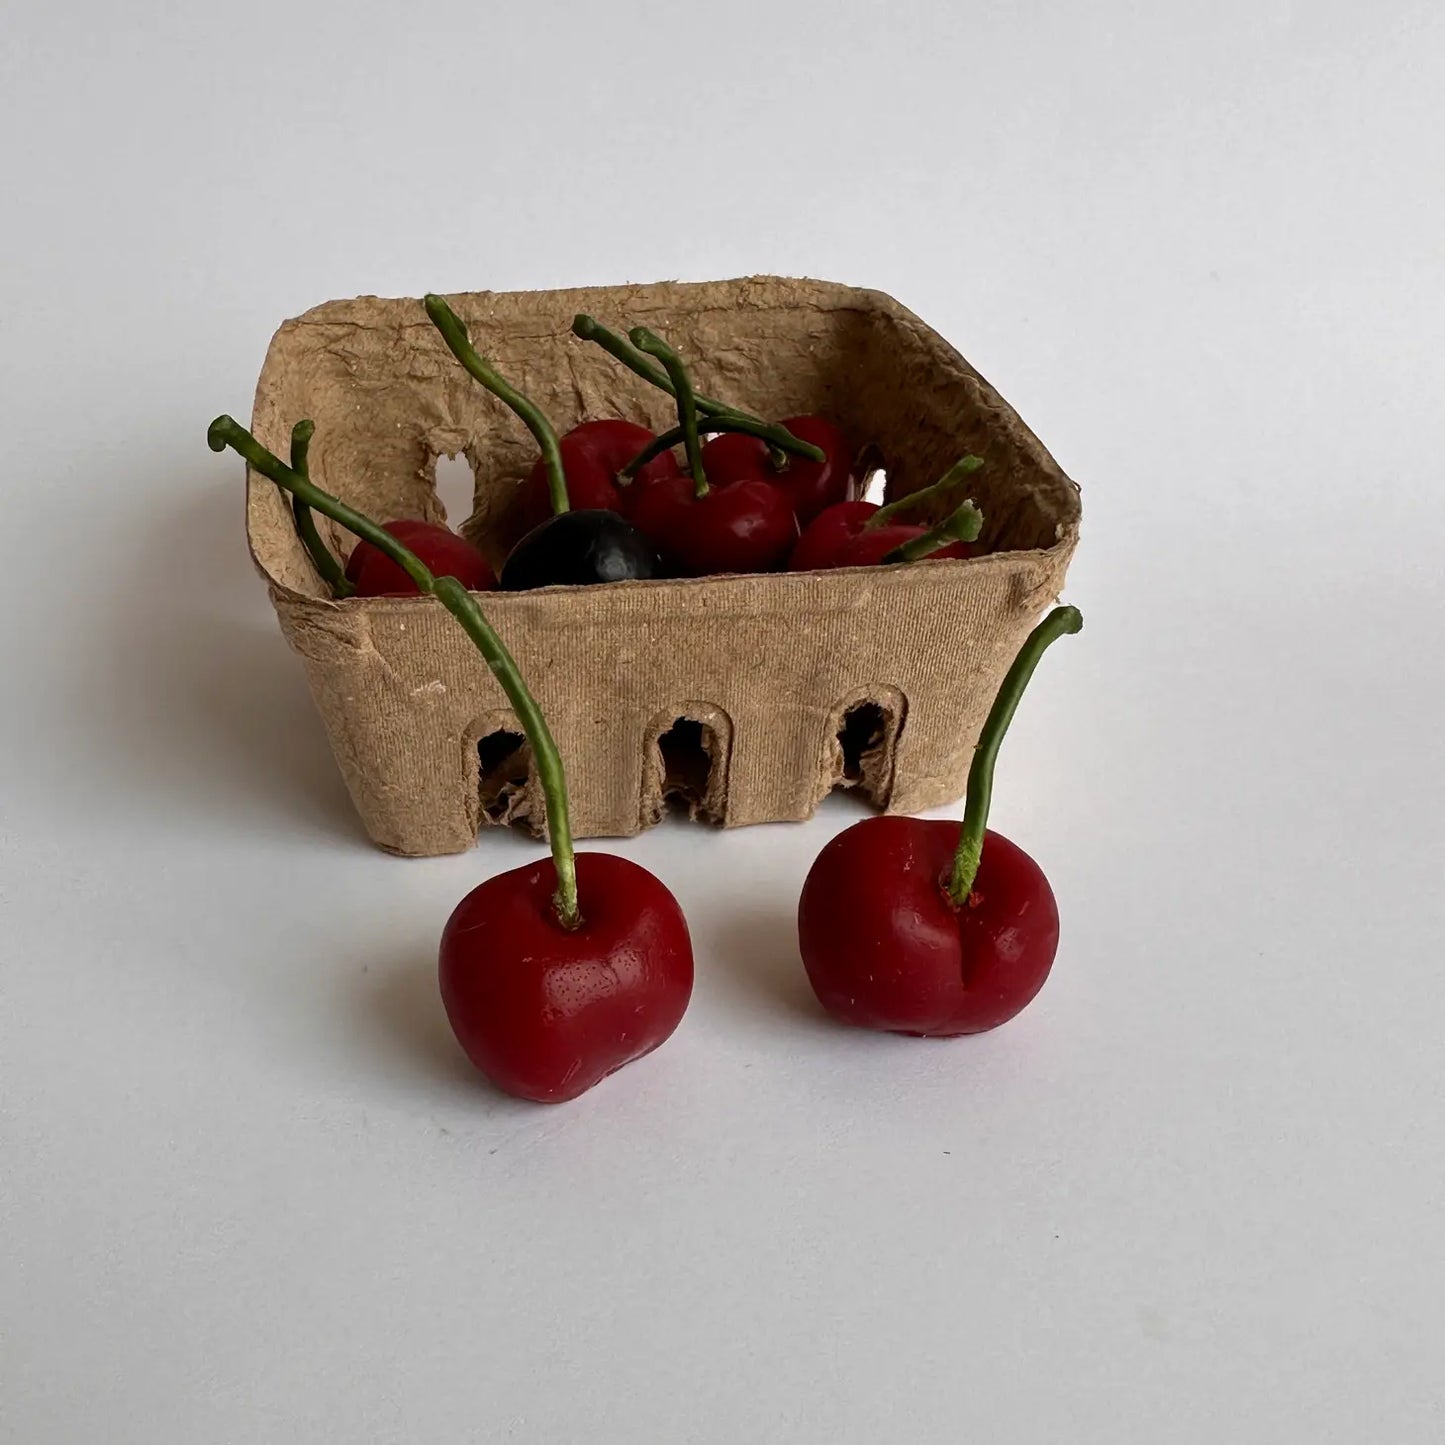 Realistic Cherry candles in a pulp fruit basket.